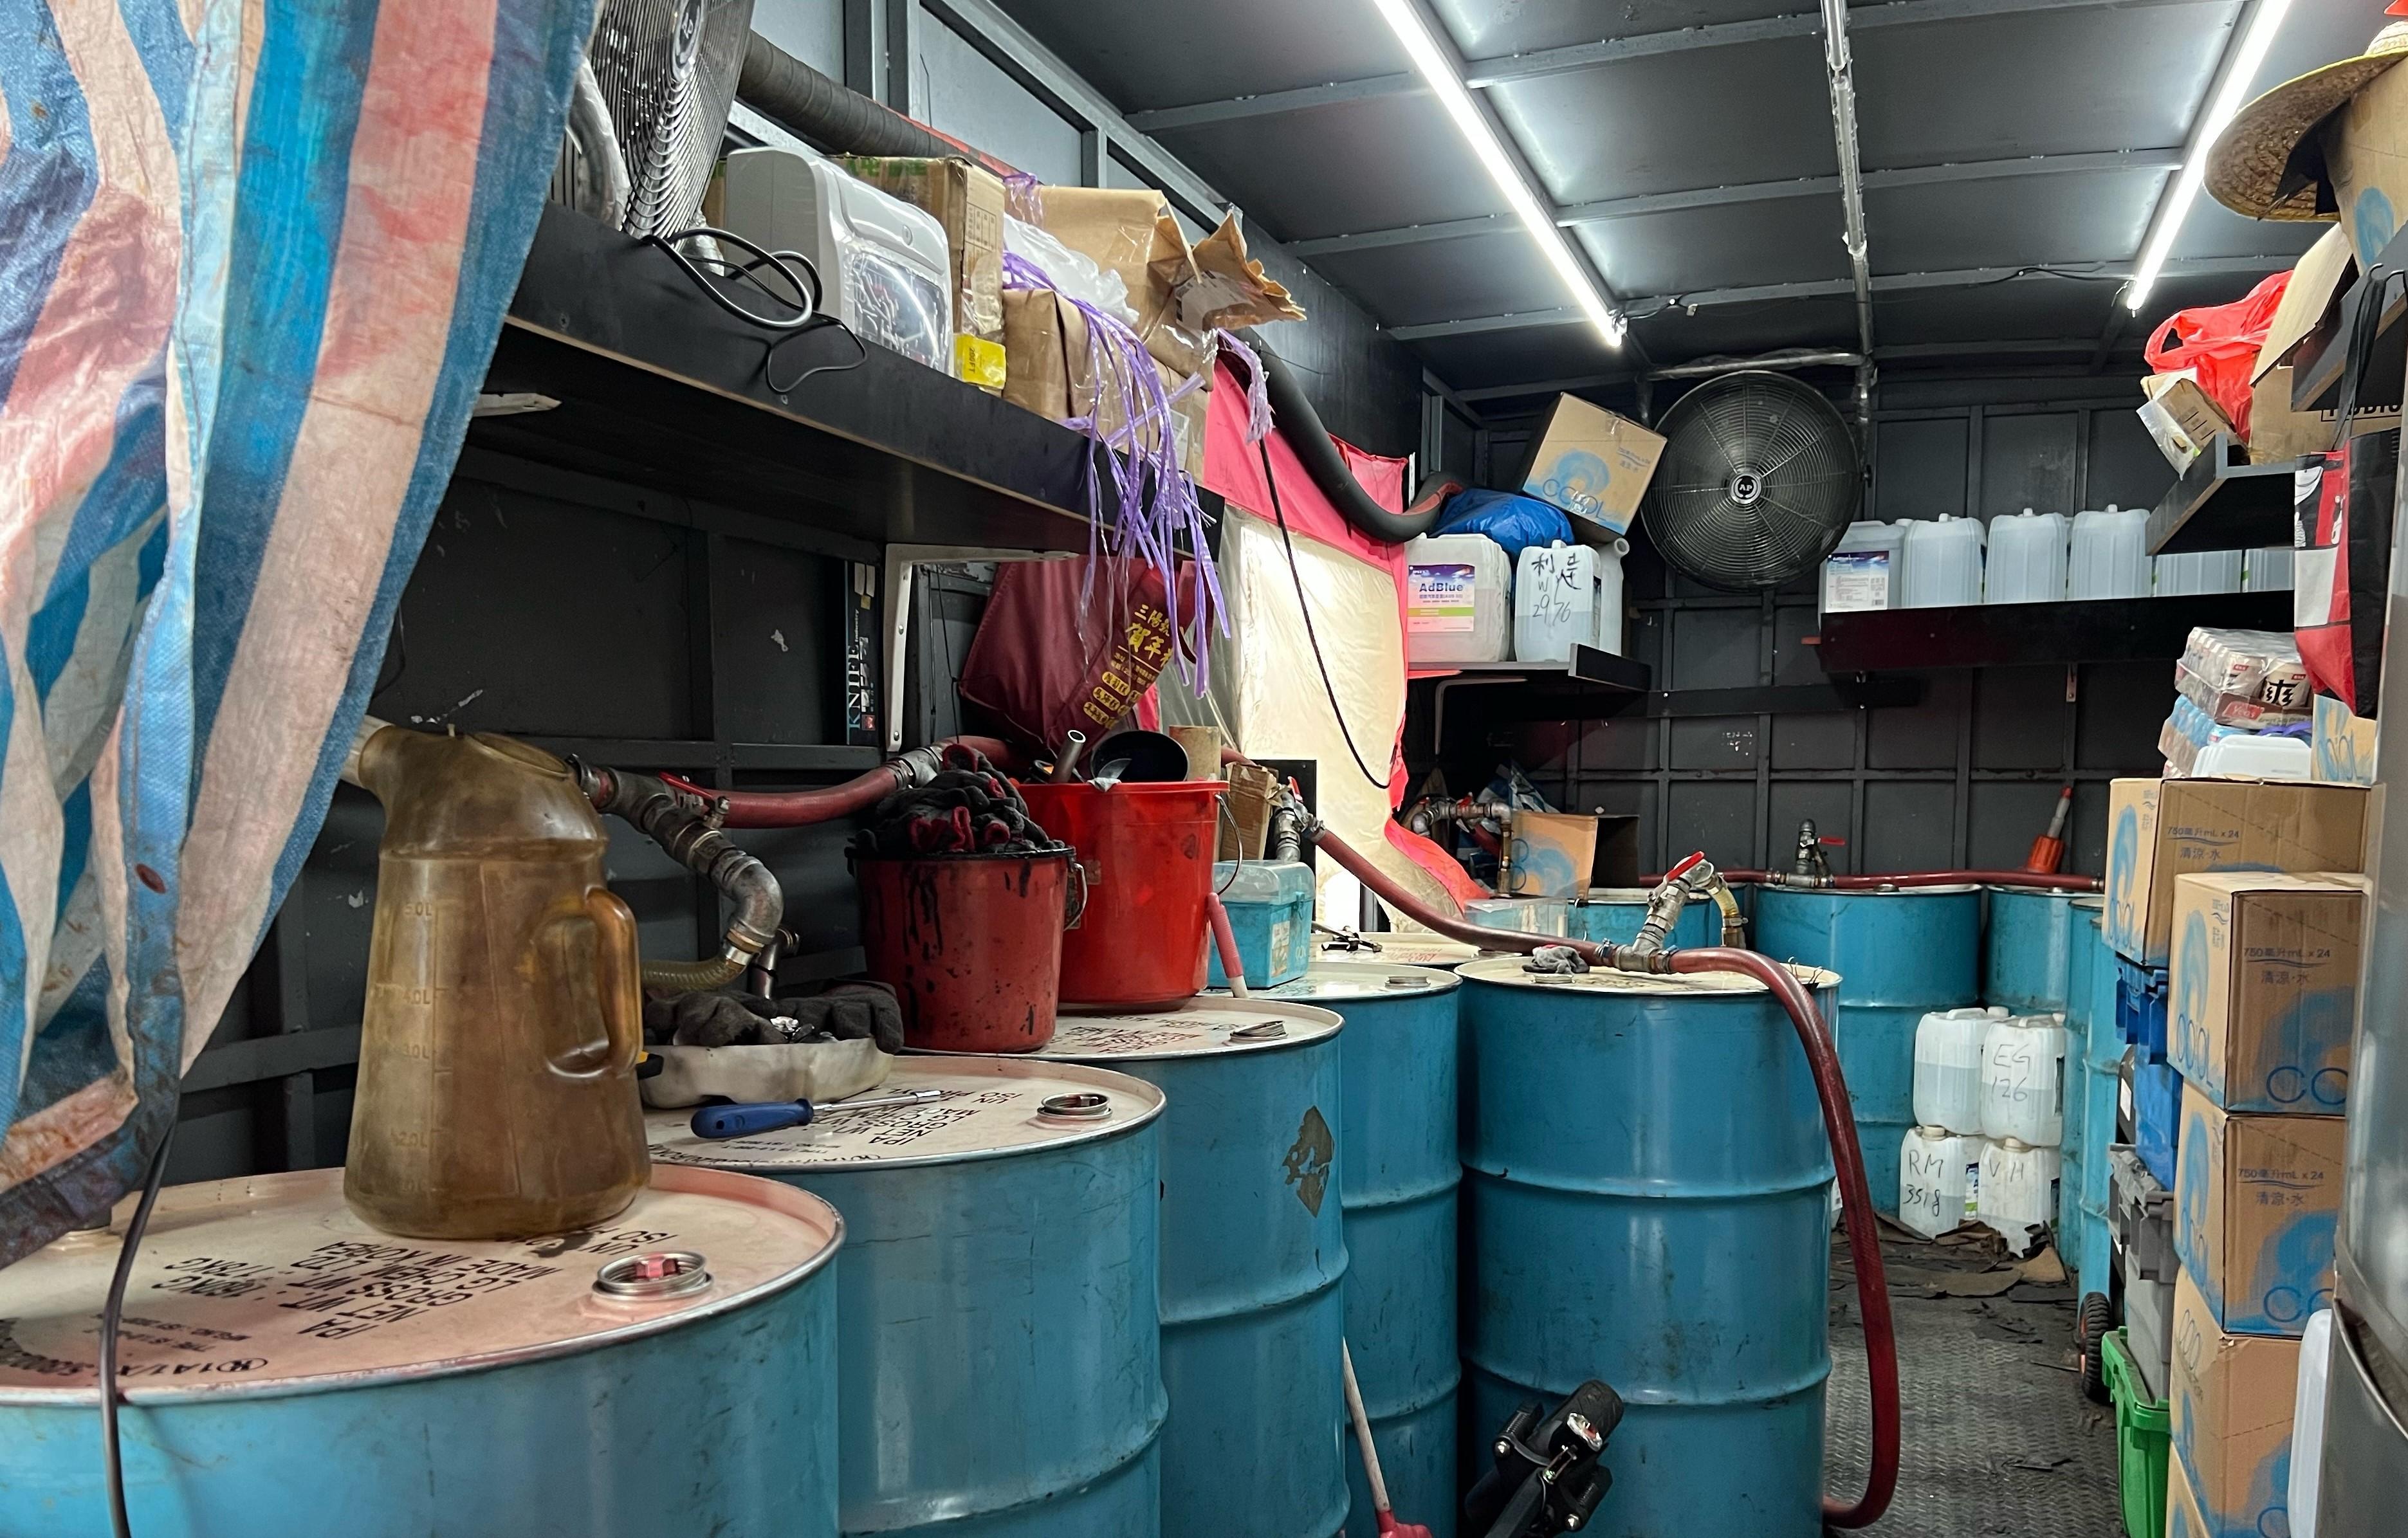 The Fire Services Department, the Hong Kong Police Force and Hong Kong Customs mounted a territory-wide joint operation codenamed "Winter Thunder" yesterday and today (December 21 and 22). Photo shows metal drums and fuelling facilities at a suspected illegal fuelling station.